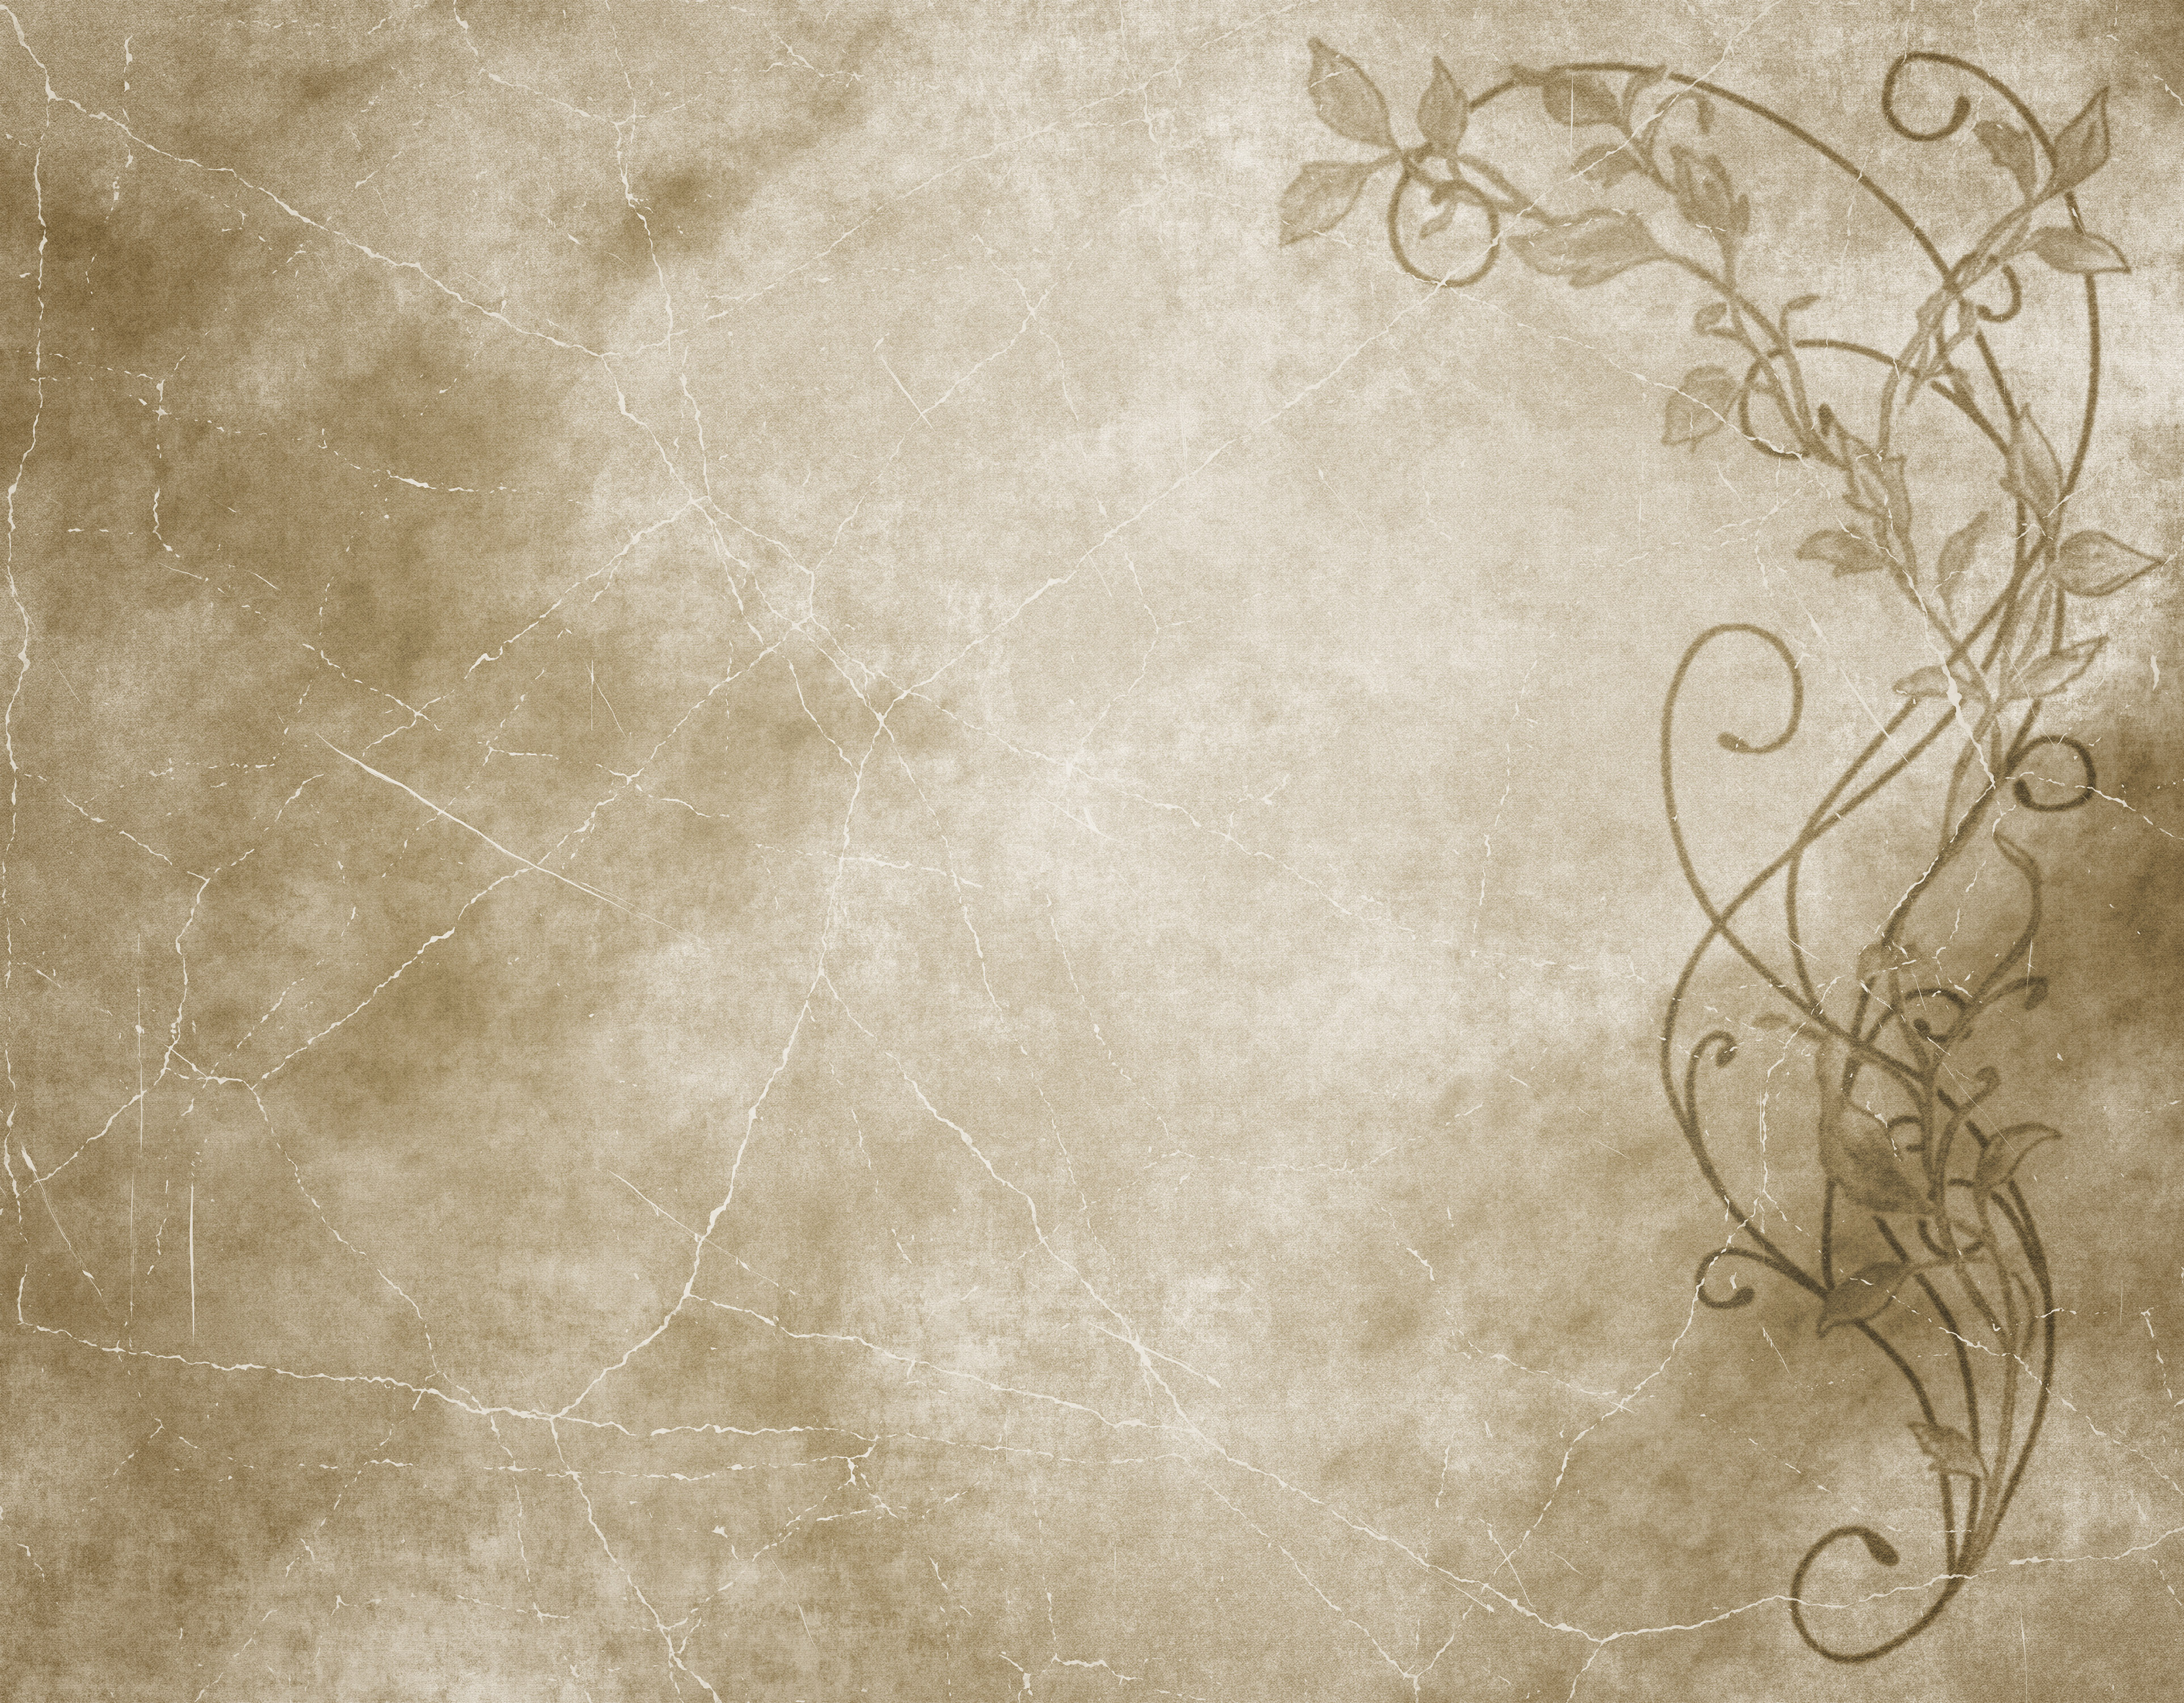 Worn Grunge Parchment Paper Background Image This Is A